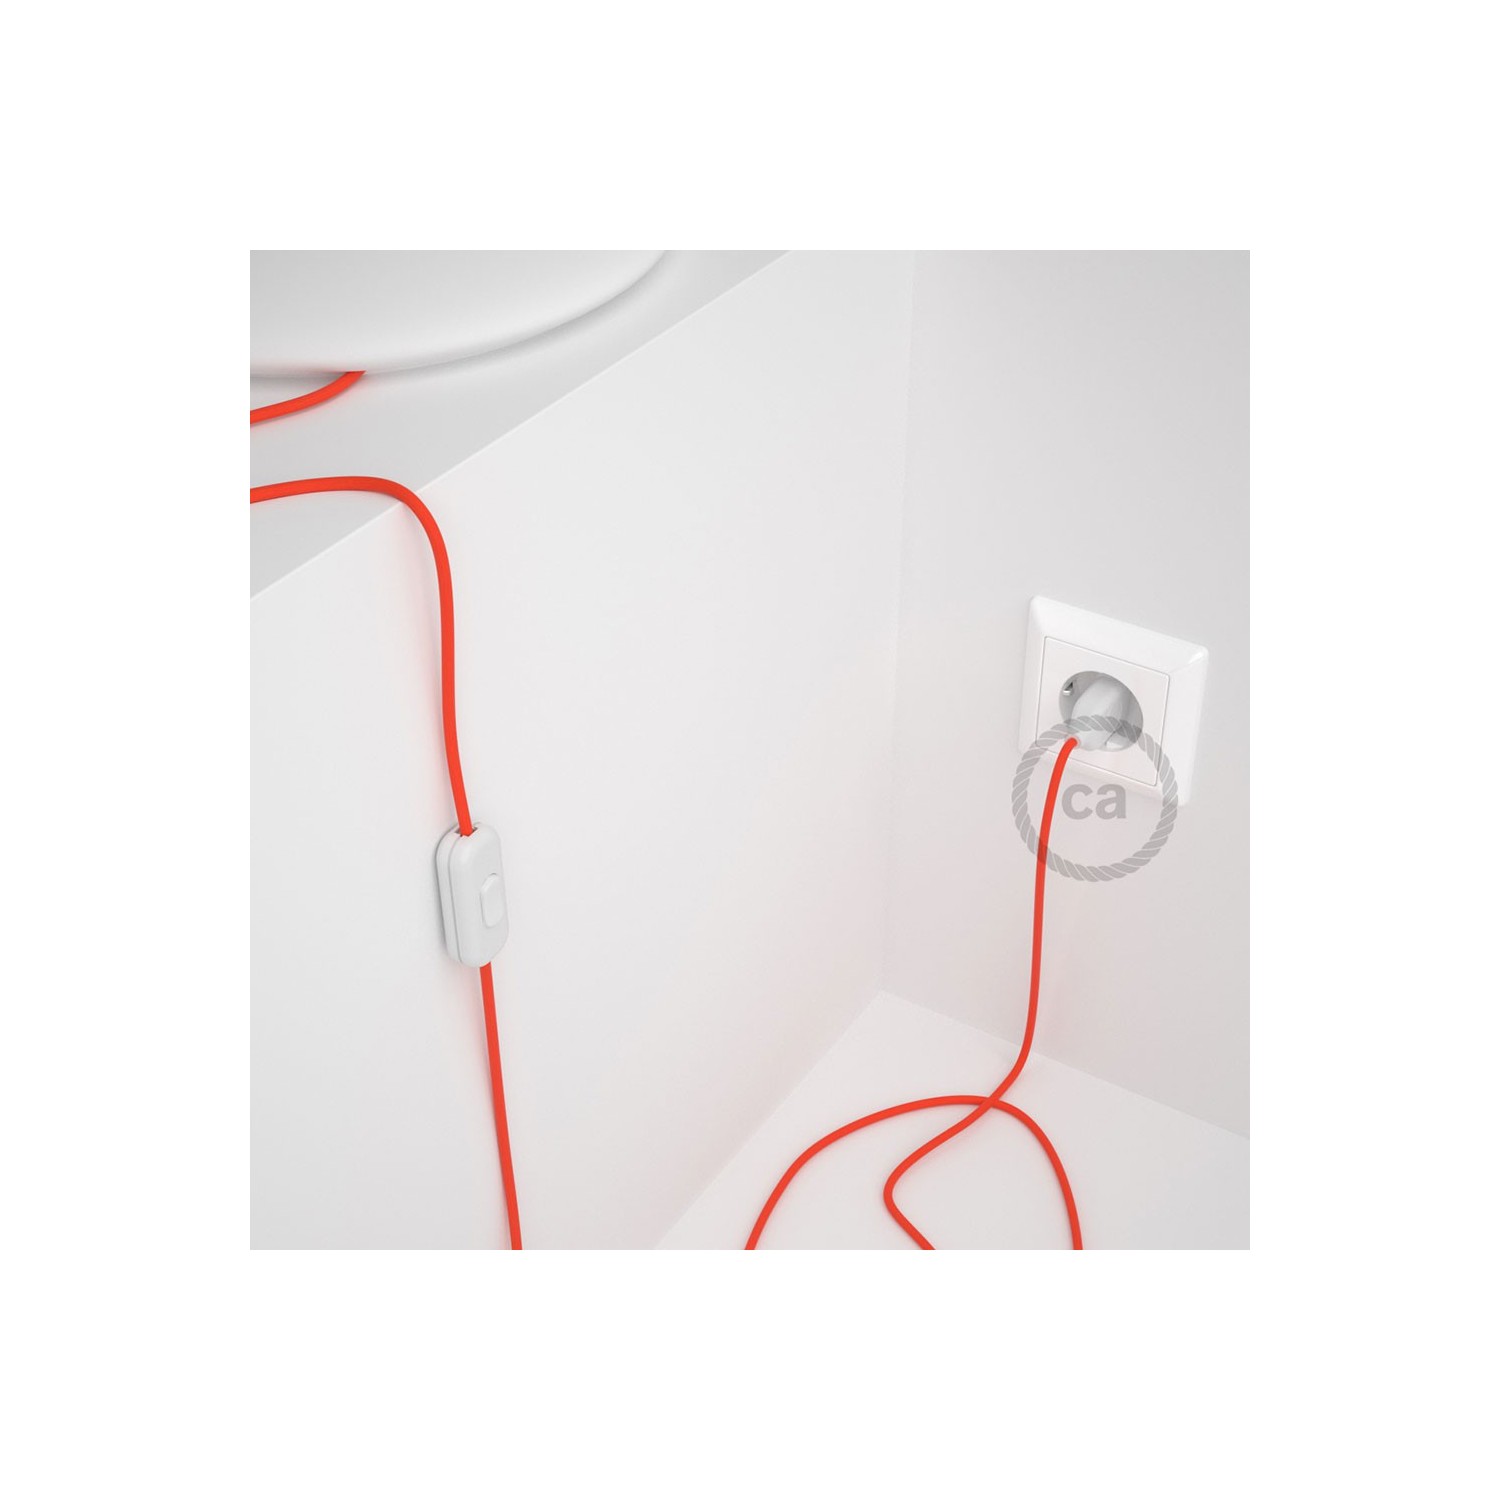 Lamp wiring, RF15 Neon Orange Rayon 1,80 m. Choose the colour of the switch and plug.